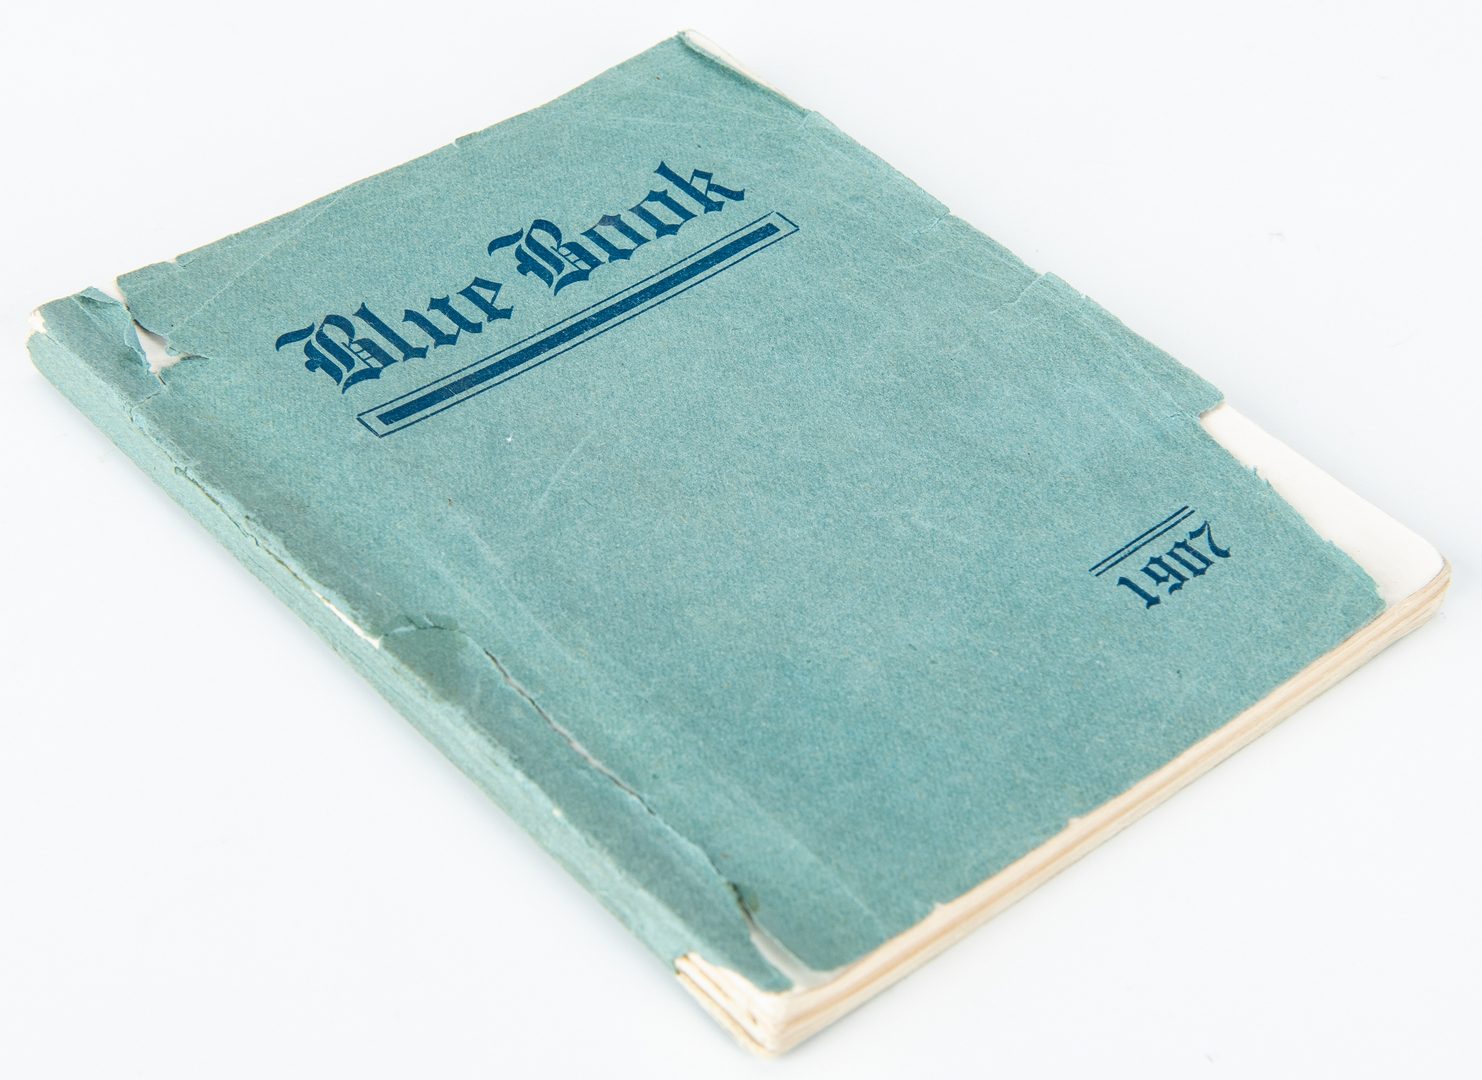 Lot 414: Storyville, New Orleans Brothel Blue Book, 1907